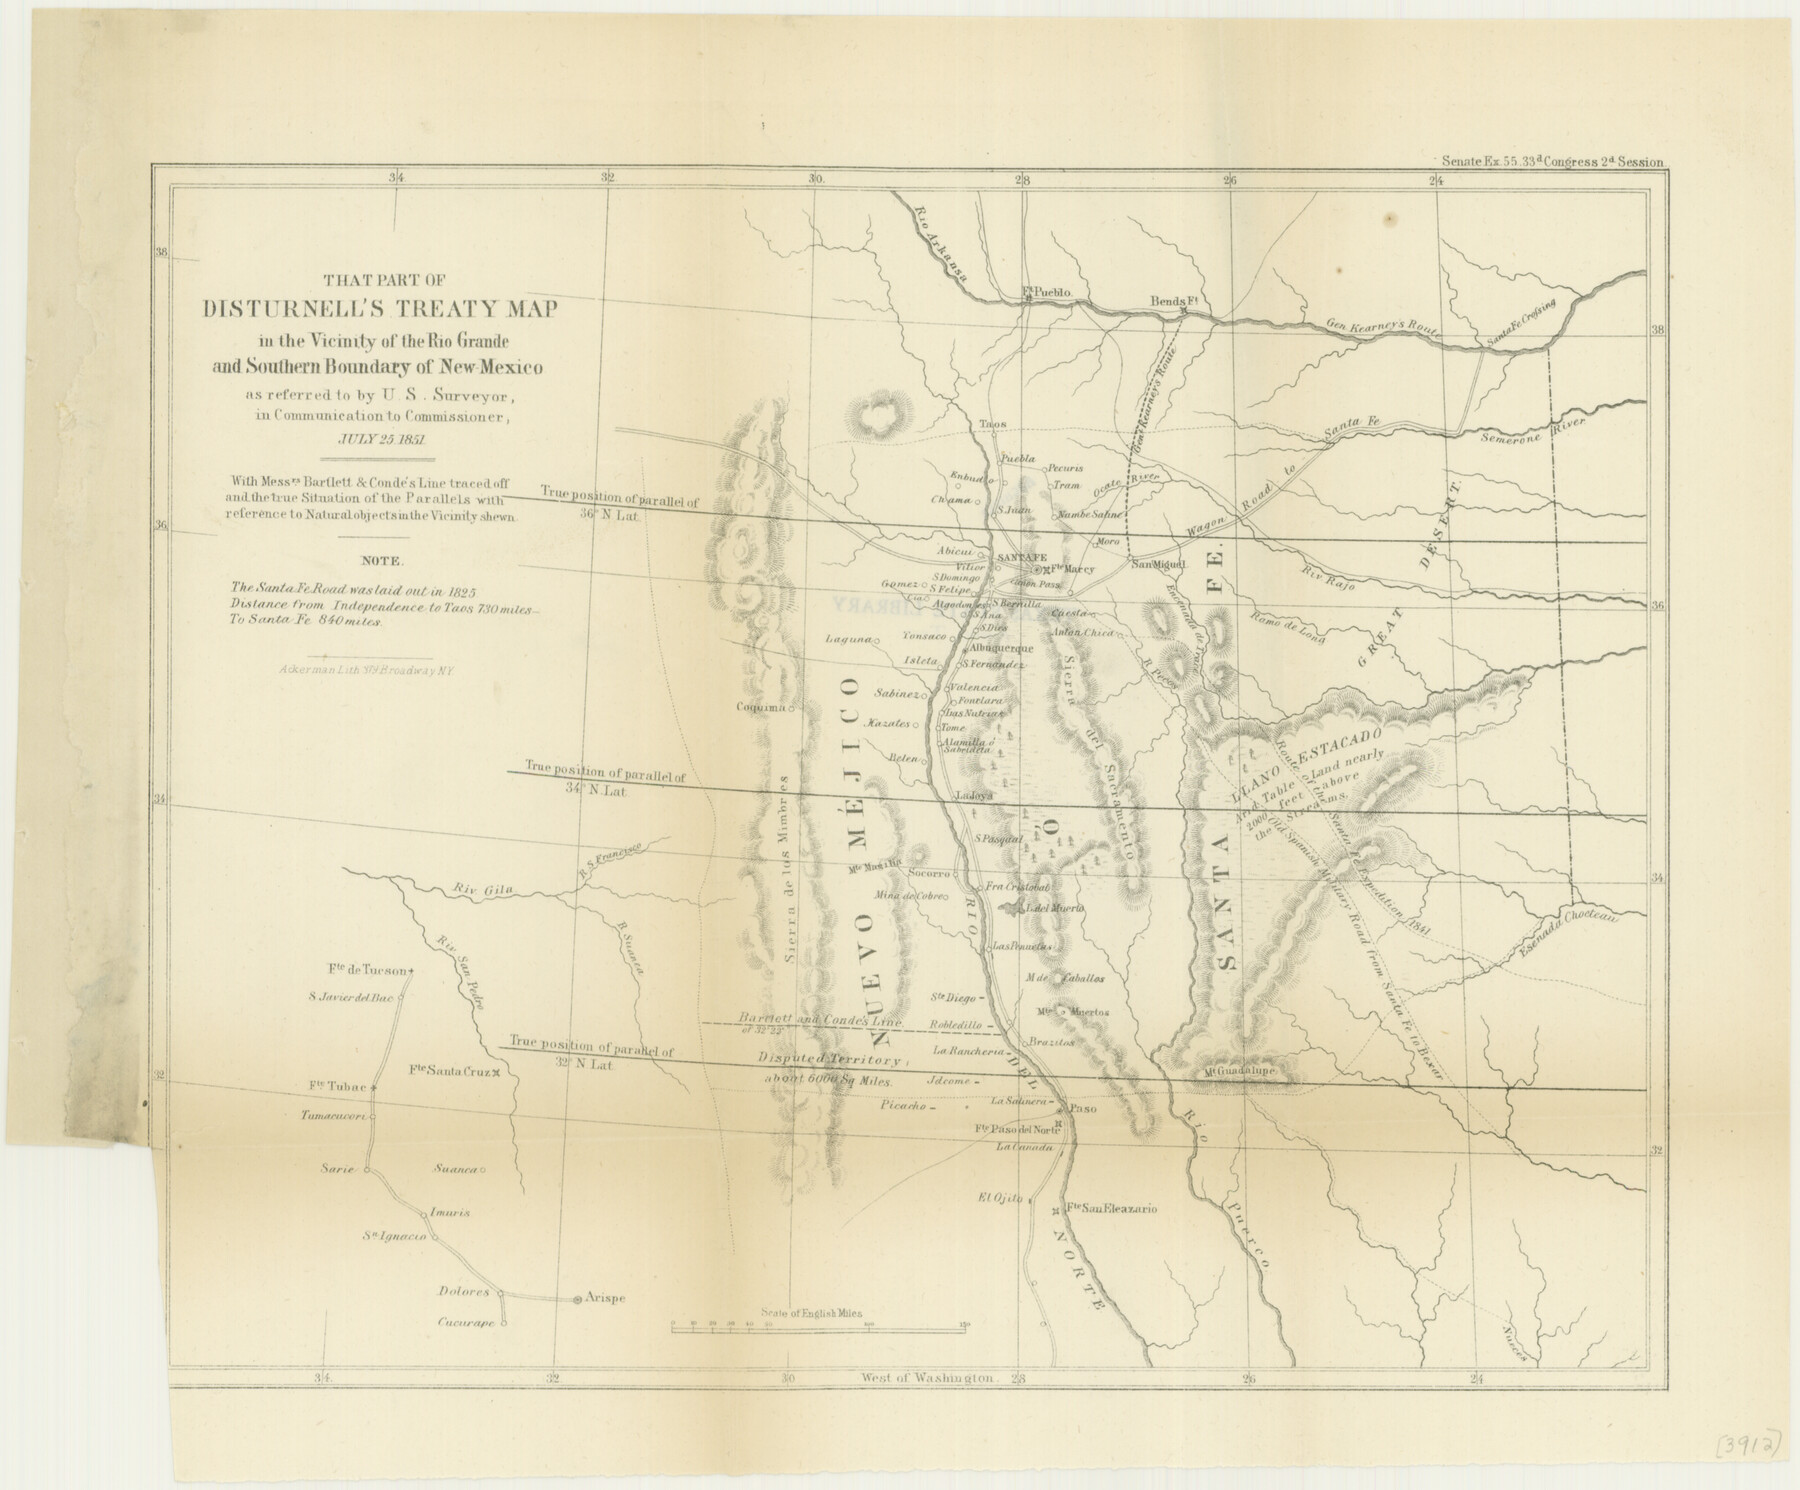 76285, That Part of Disturnell's Treaty Map in the Vicinity of the Rio Grande and Southern Boundary of New Mexico, Texas State Library and Archives